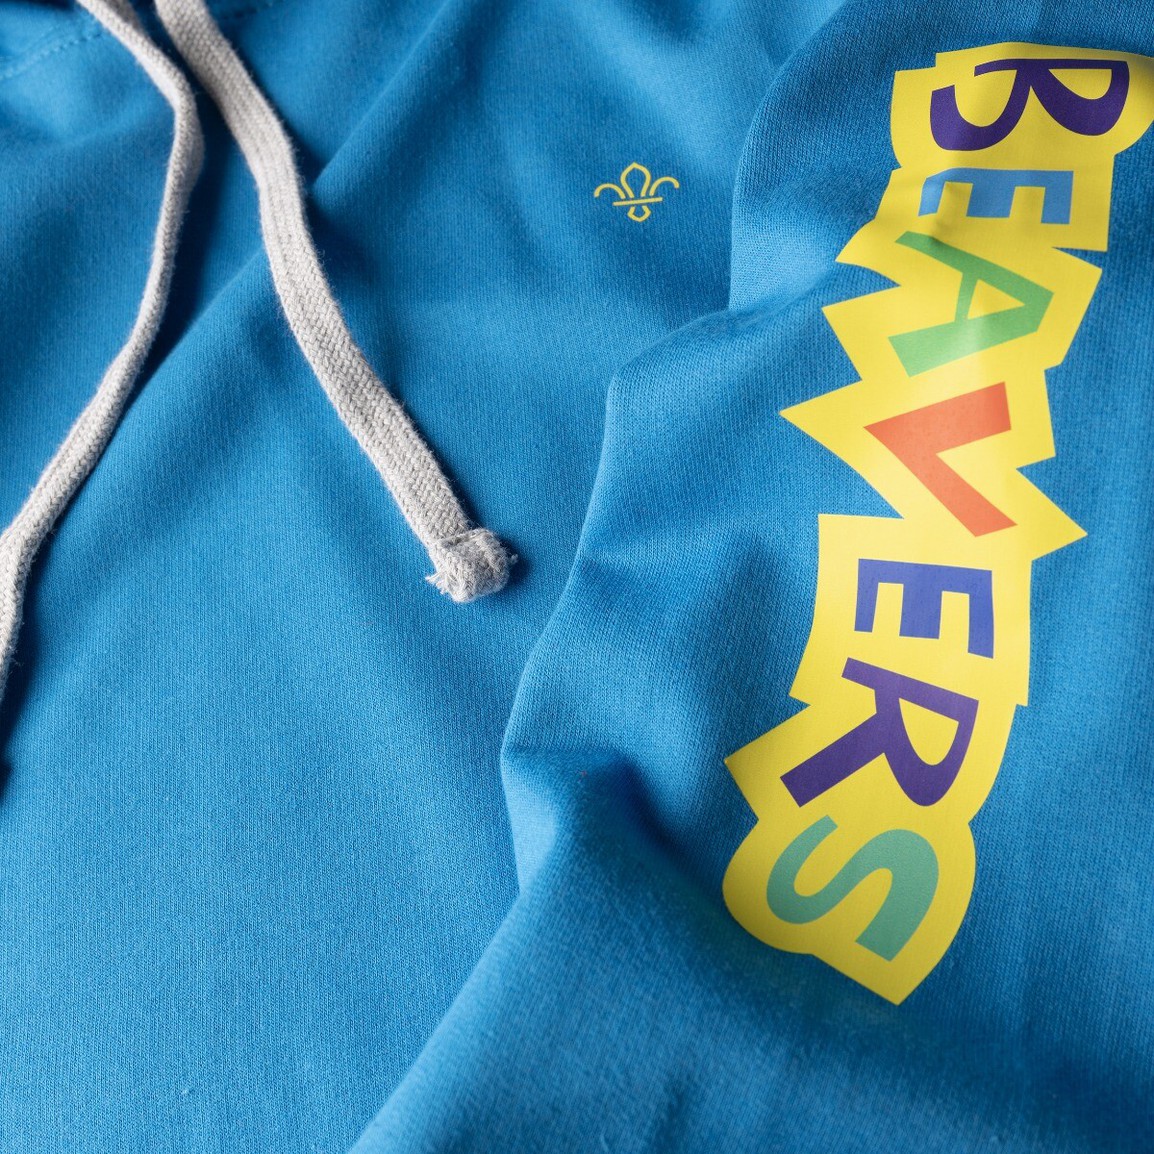 Beaver Scouts Hoodie for Adults | Beavers Clothing New in